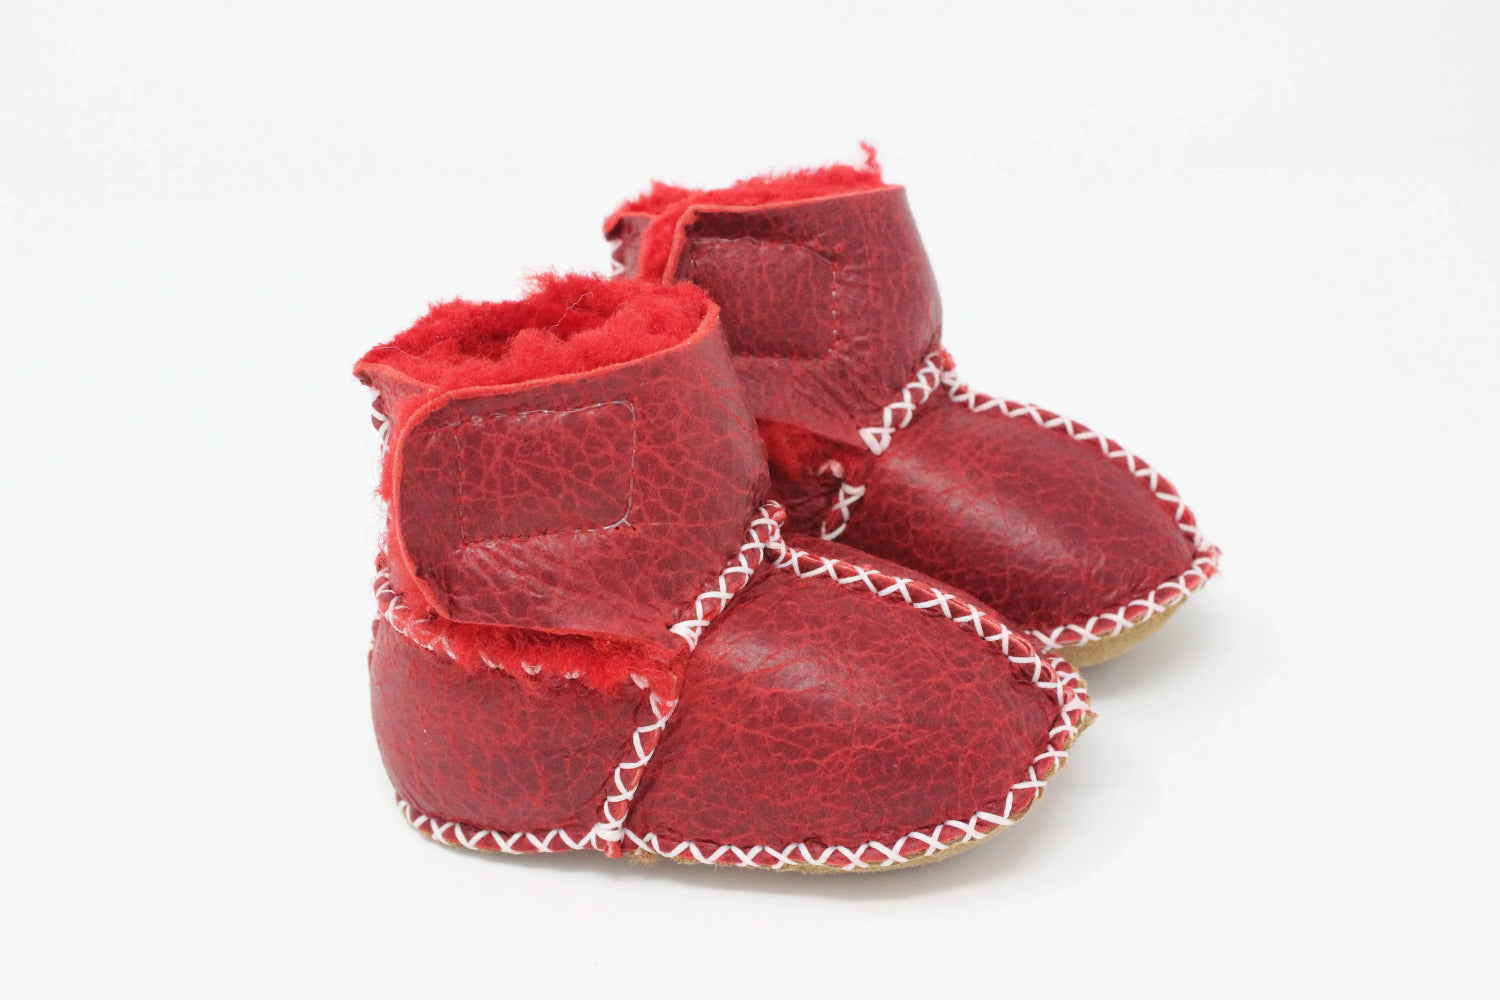 Cozy Toez Red Leather Strap